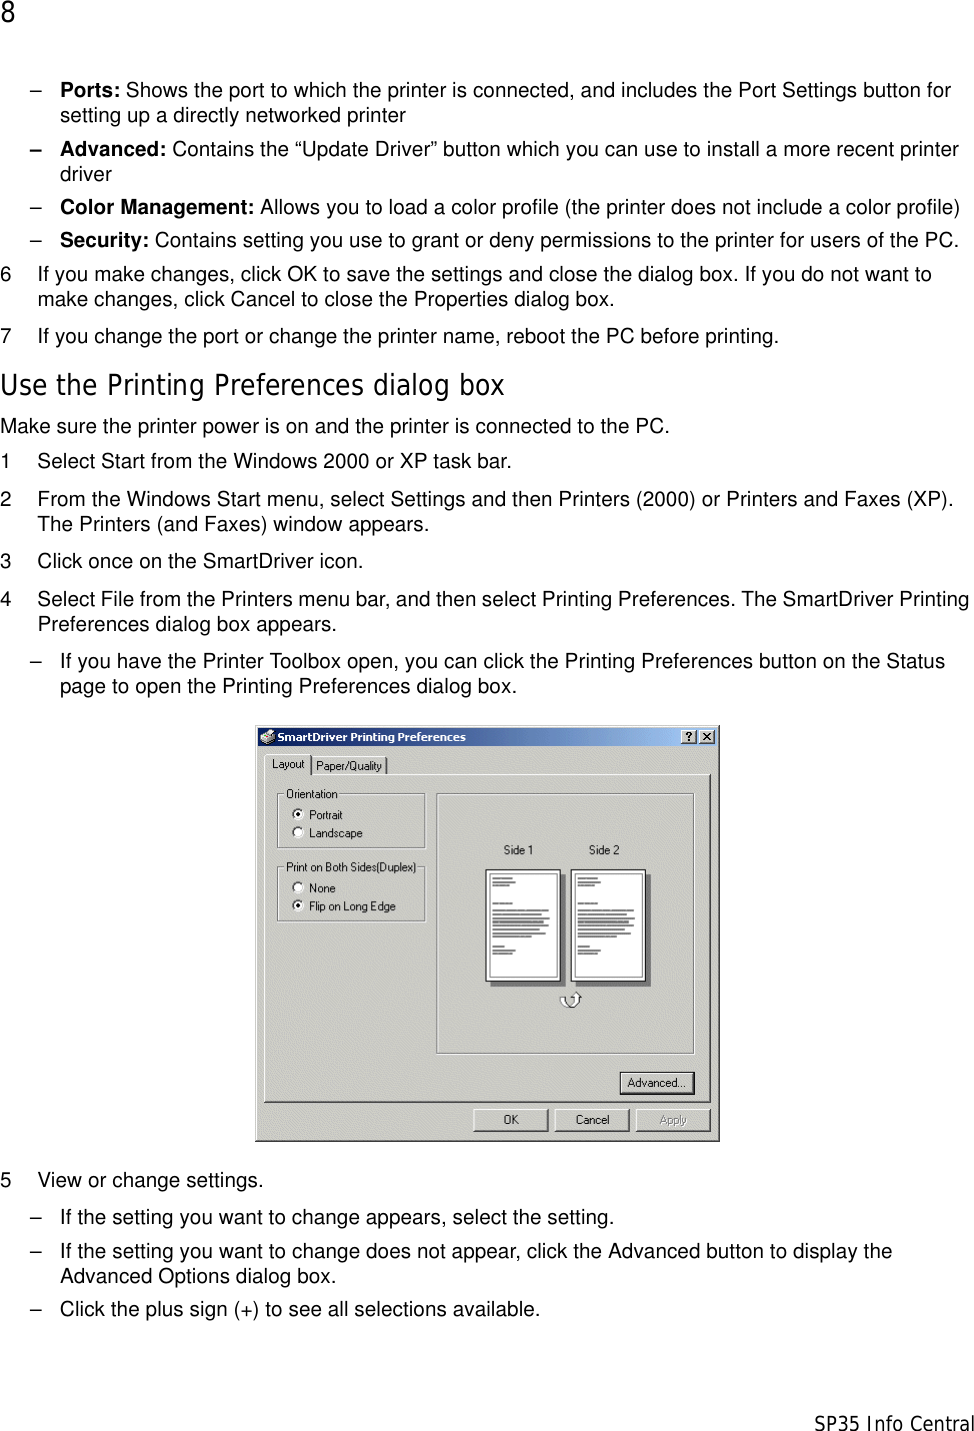 8                      SP35 Info Central–Ports: Shows the port to which the printer is connected, and includes the Port Settings button for setting up a directly networked printer– Advanced: Contains the “Update Driver” button which you can use to install a more recent printer driver–Color Management: Allows you to load a color profile (the printer does not include a color profile)–Security: Contains setting you use to grant or deny permissions to the printer for users of the PC.6 If you make changes, click OK to save the settings and close the dialog box. If you do not want to make changes, click Cancel to close the Properties dialog box.7 If you change the port or change the printer name, reboot the PC before printing.Use the Printing Preferences dialog boxMake sure the printer power is on and the printer is connected to the PC.1 Select Start from the Windows 2000 or XP task bar.2 From the Windows Start menu, select Settings and then Printers (2000) or Printers and Faxes (XP). The Printers (and Faxes) window appears.3 Click once on the SmartDriver icon.4 Select File from the Printers menu bar, and then select Printing Preferences. The SmartDriver Printing Preferences dialog box appears.– If you have the Printer Toolbox open, you can click the Printing Preferences button on the Status page to open the Printing Preferences dialog box.5 View or change settings.– If the setting you want to change appears, select the setting.– If the setting you want to change does not appear, click the Advanced button to display the Advanced Options dialog box. – Click the plus sign (+) to see all selections available. 